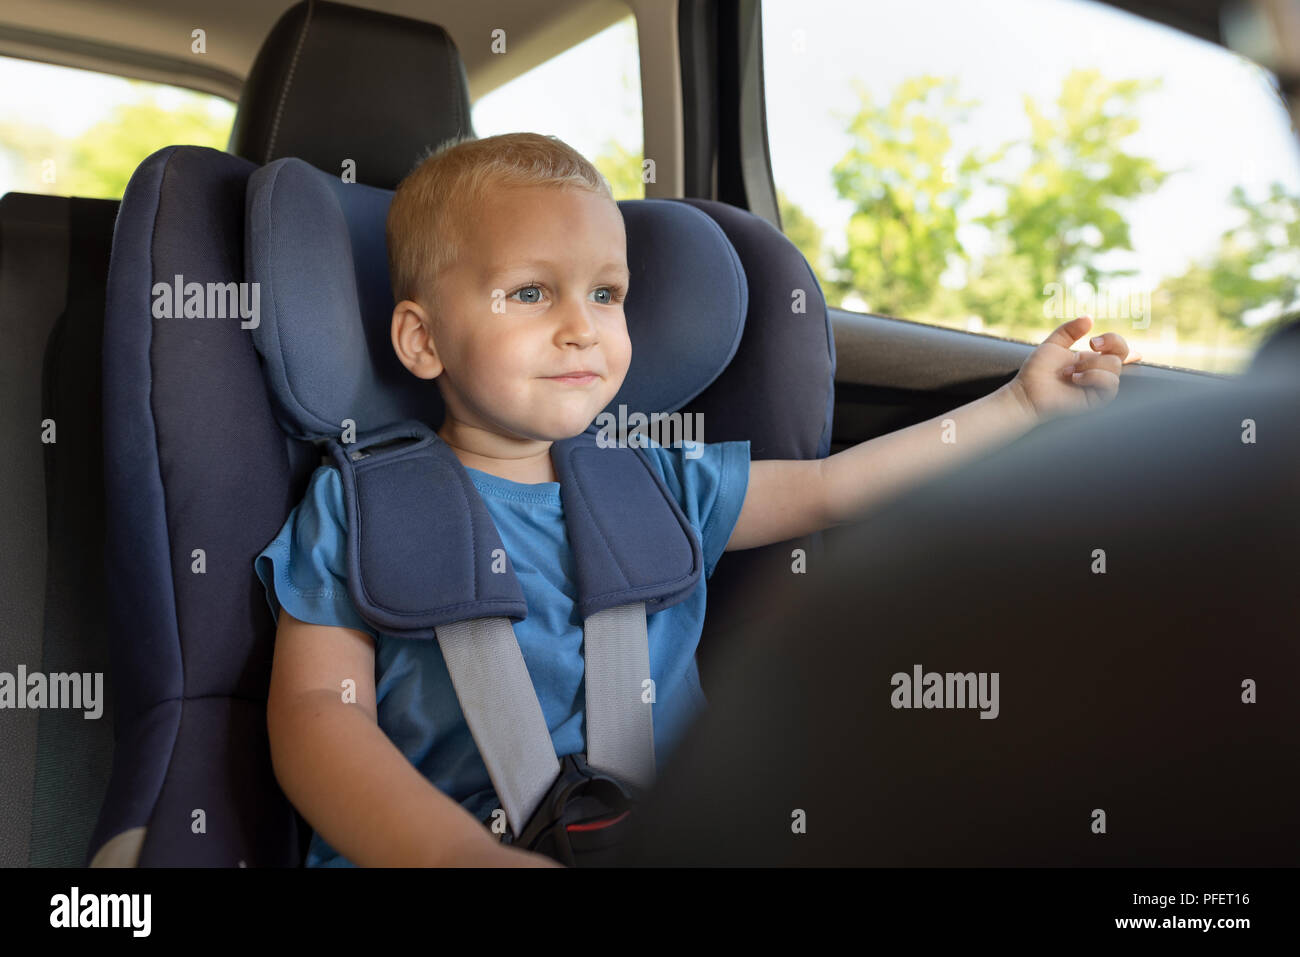 Boy buckled into car seat. Safe family travel concept Stock Photo